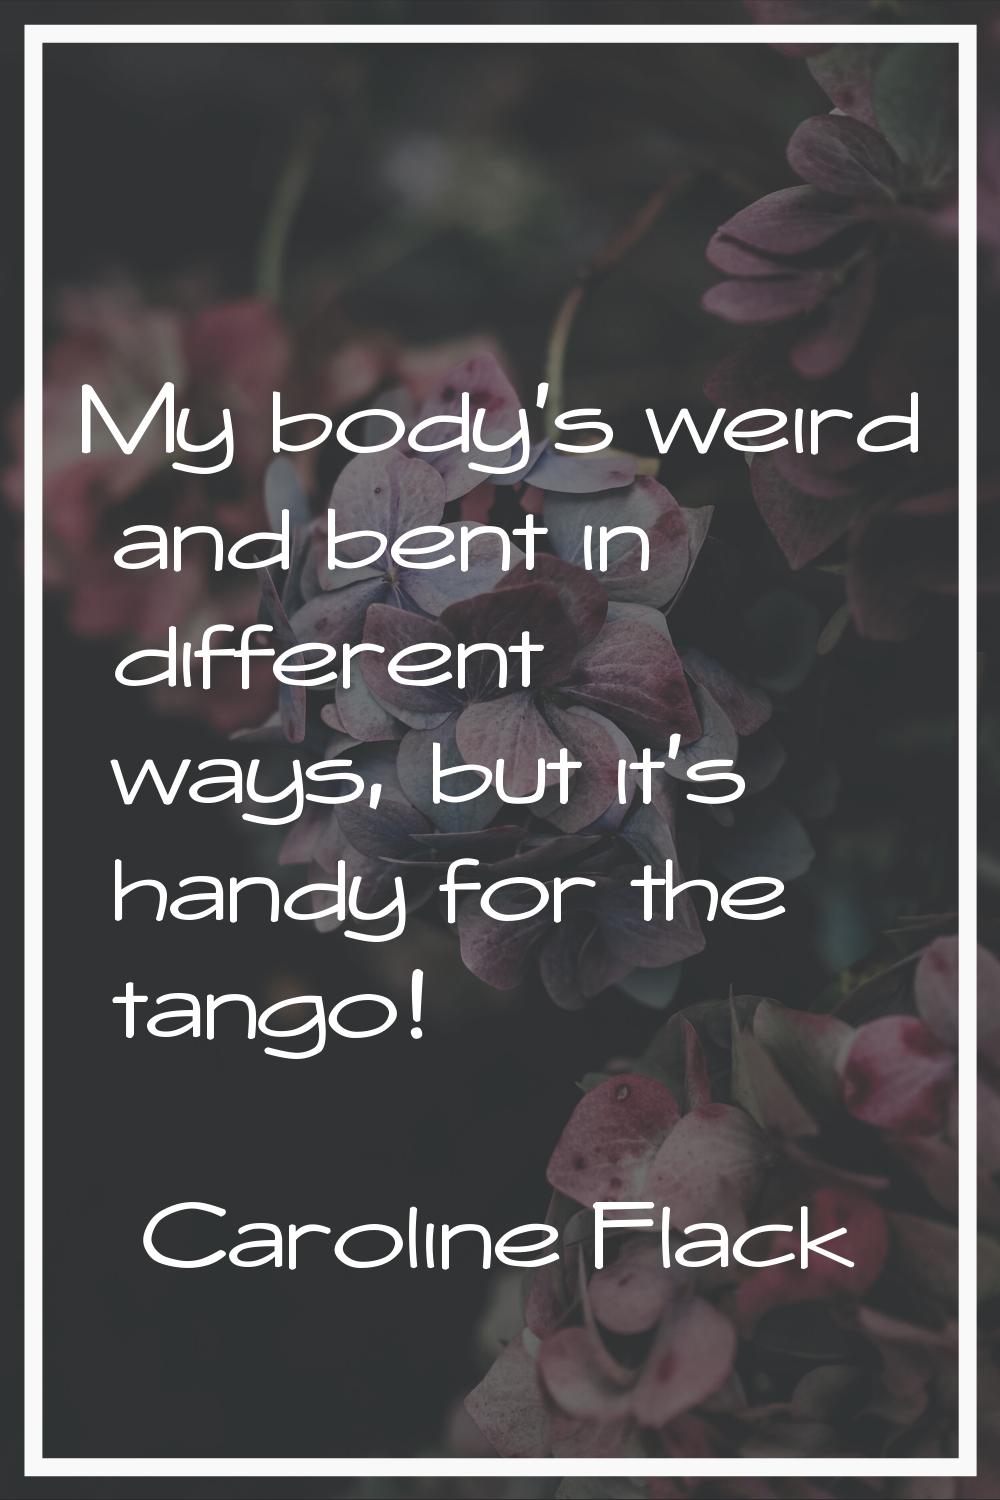 My body's weird and bent in different ways, but it's handy for the tango!